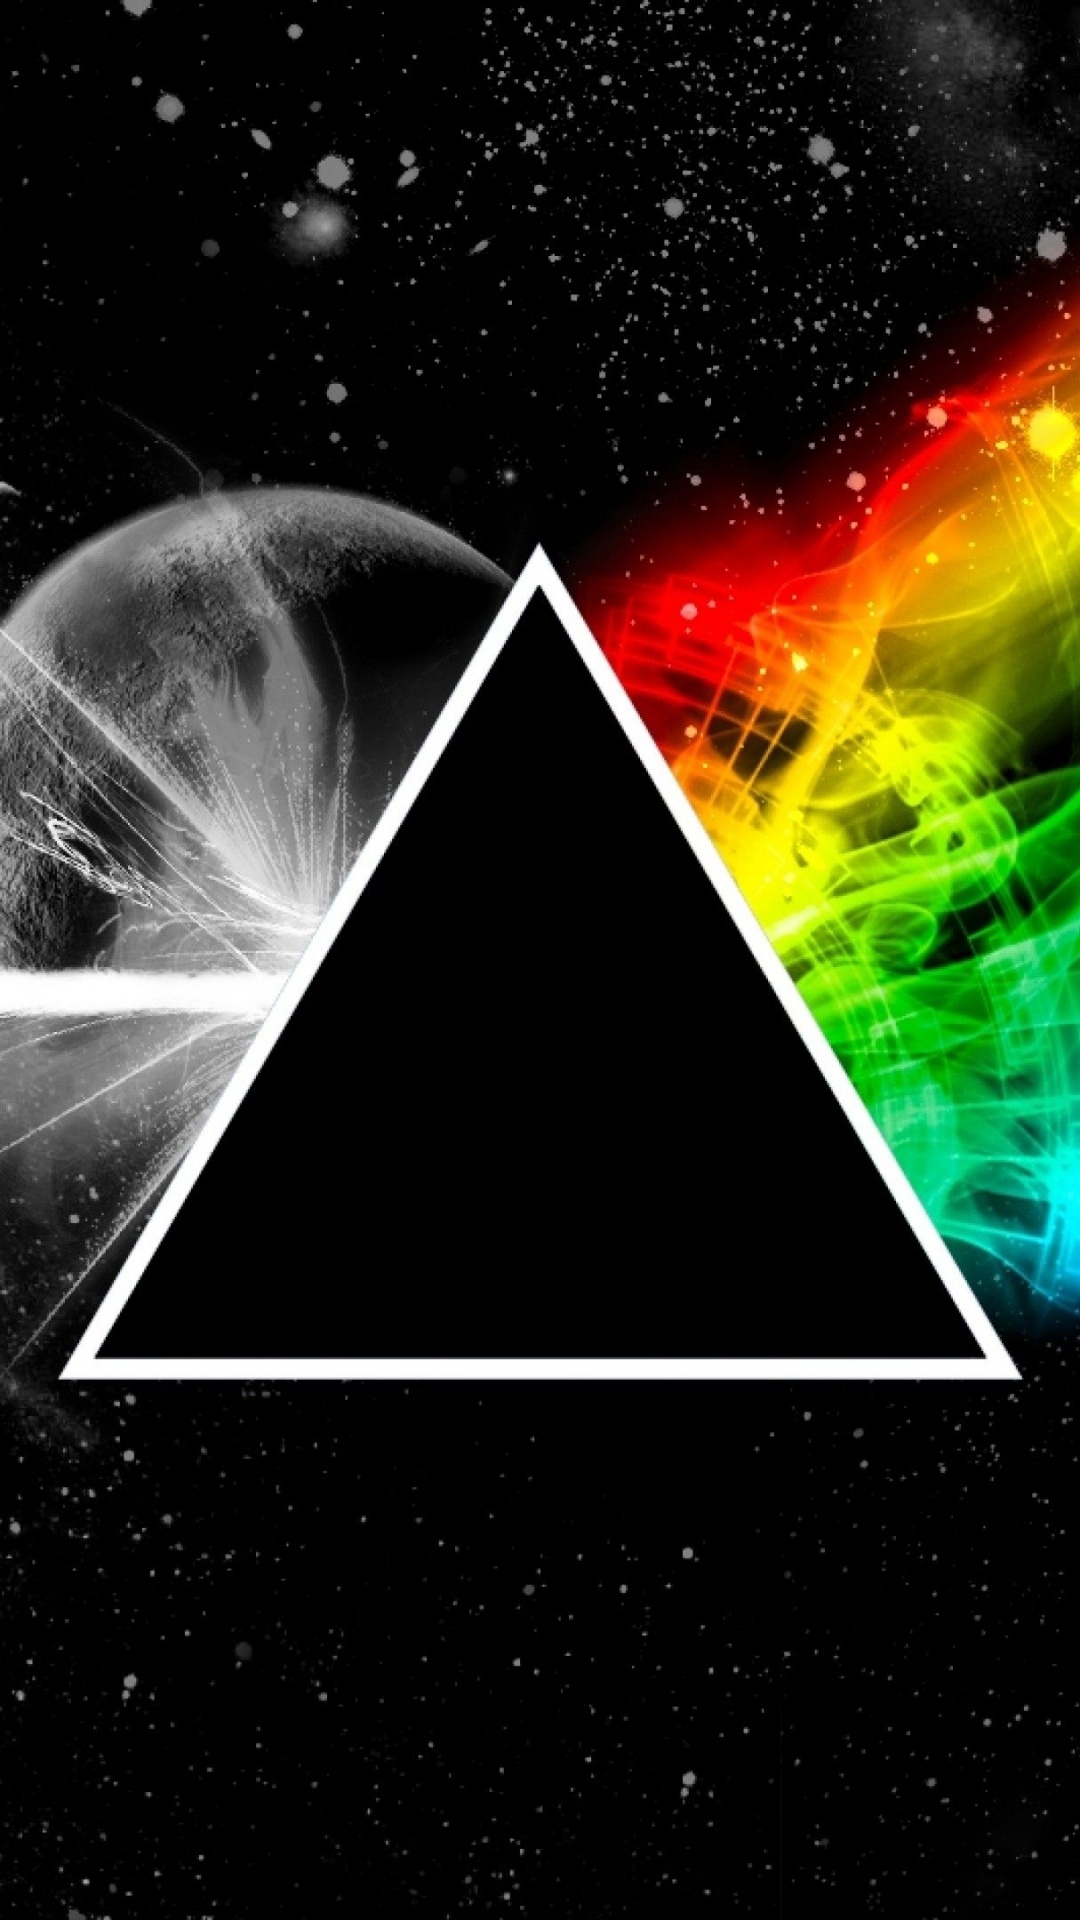 High resolution Dark Side of the Moon backgrounds I made  rpinkfloyd